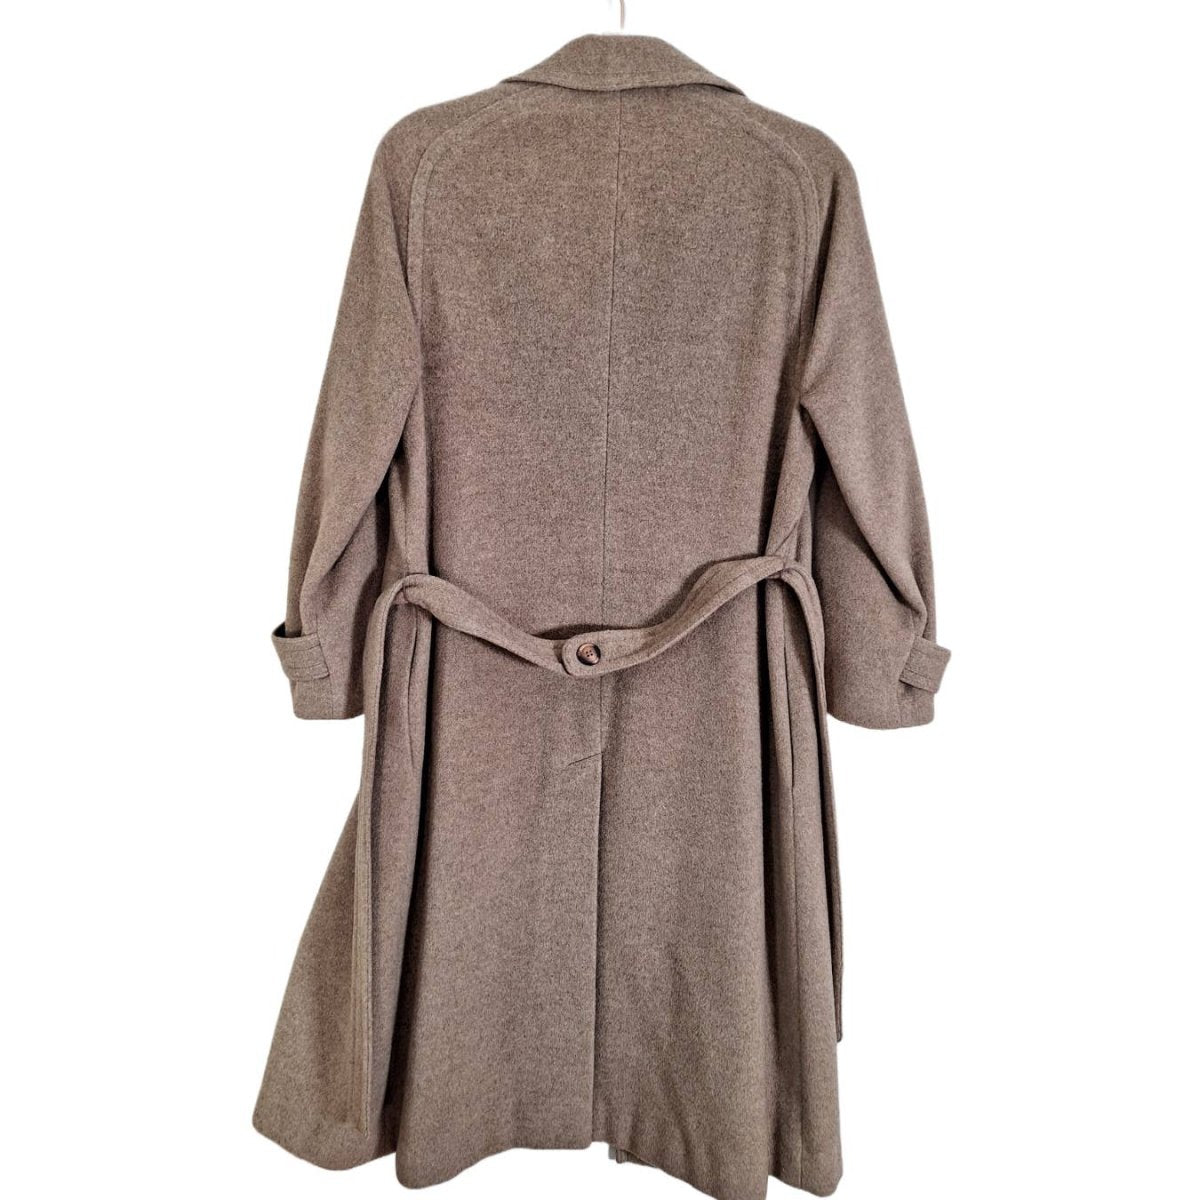 Vintage 70s/80s Taupe 100% Cashmere Coat Size S/M - themallvintage The Mall Vintage